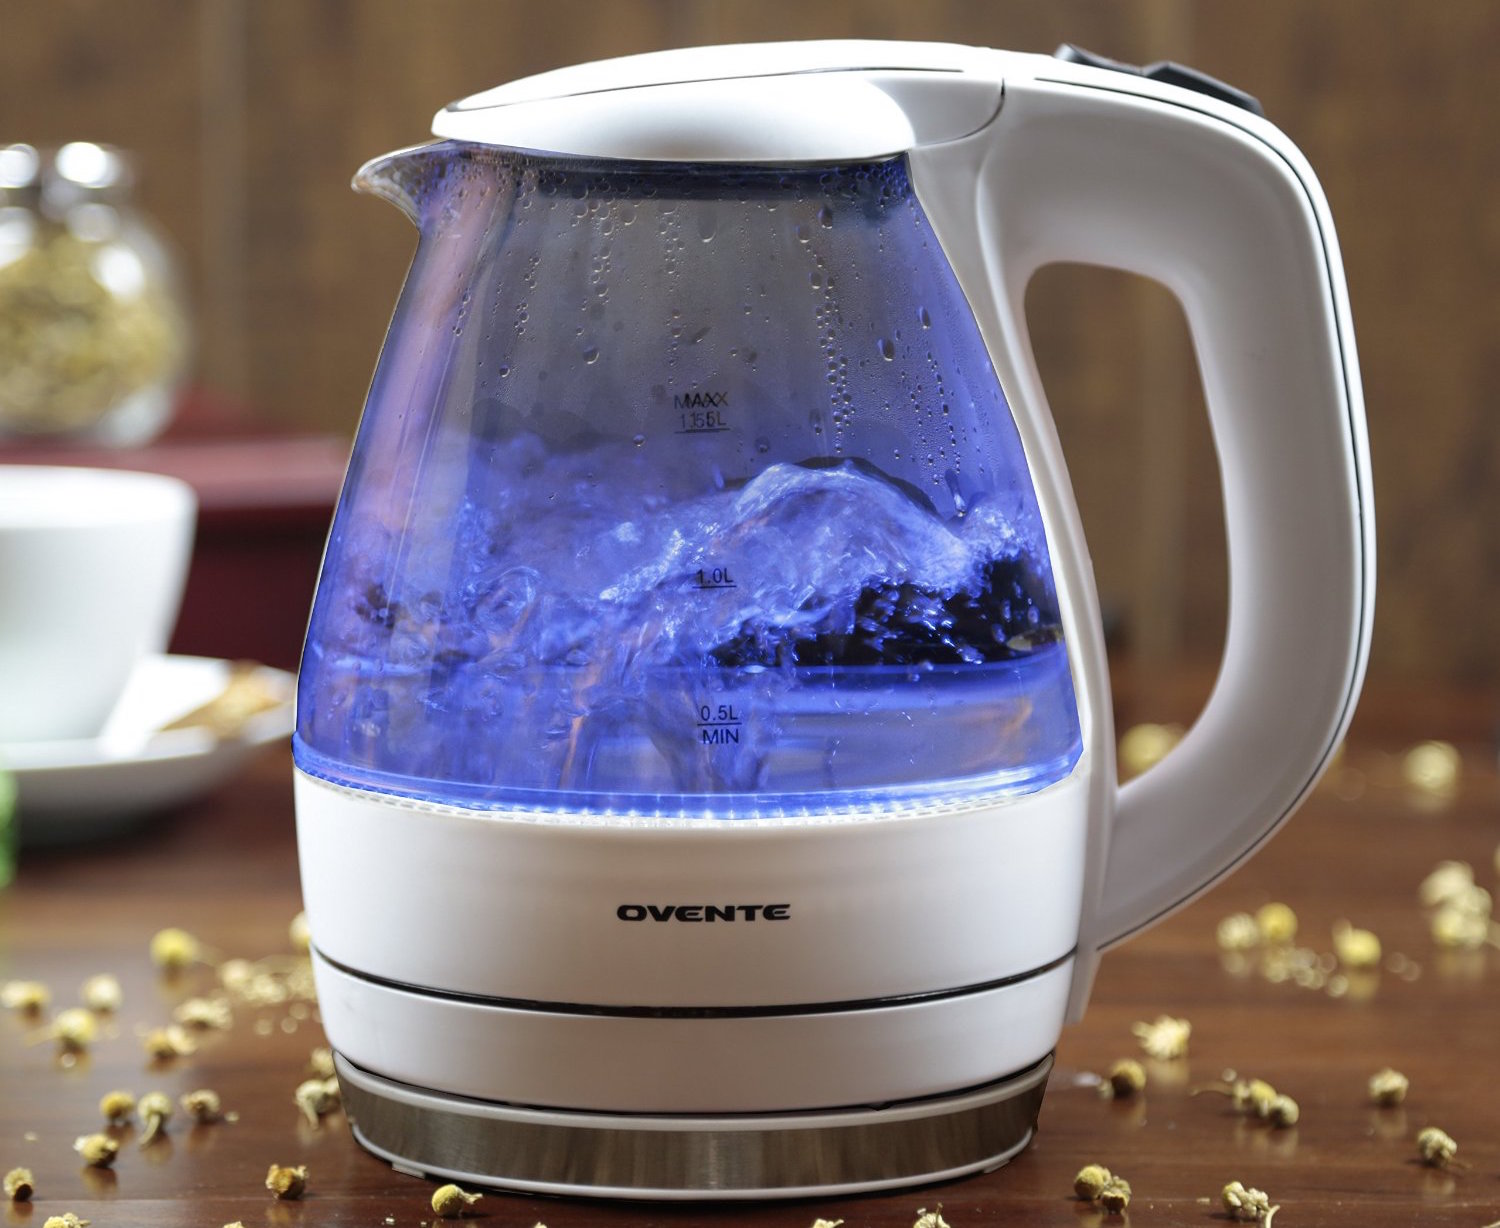 https://9to5toys.com/wp-content/uploads/sites/5/2015/08/1-5-l-ovente-glass-electric-kettle-kg83w-sale-01.jpg